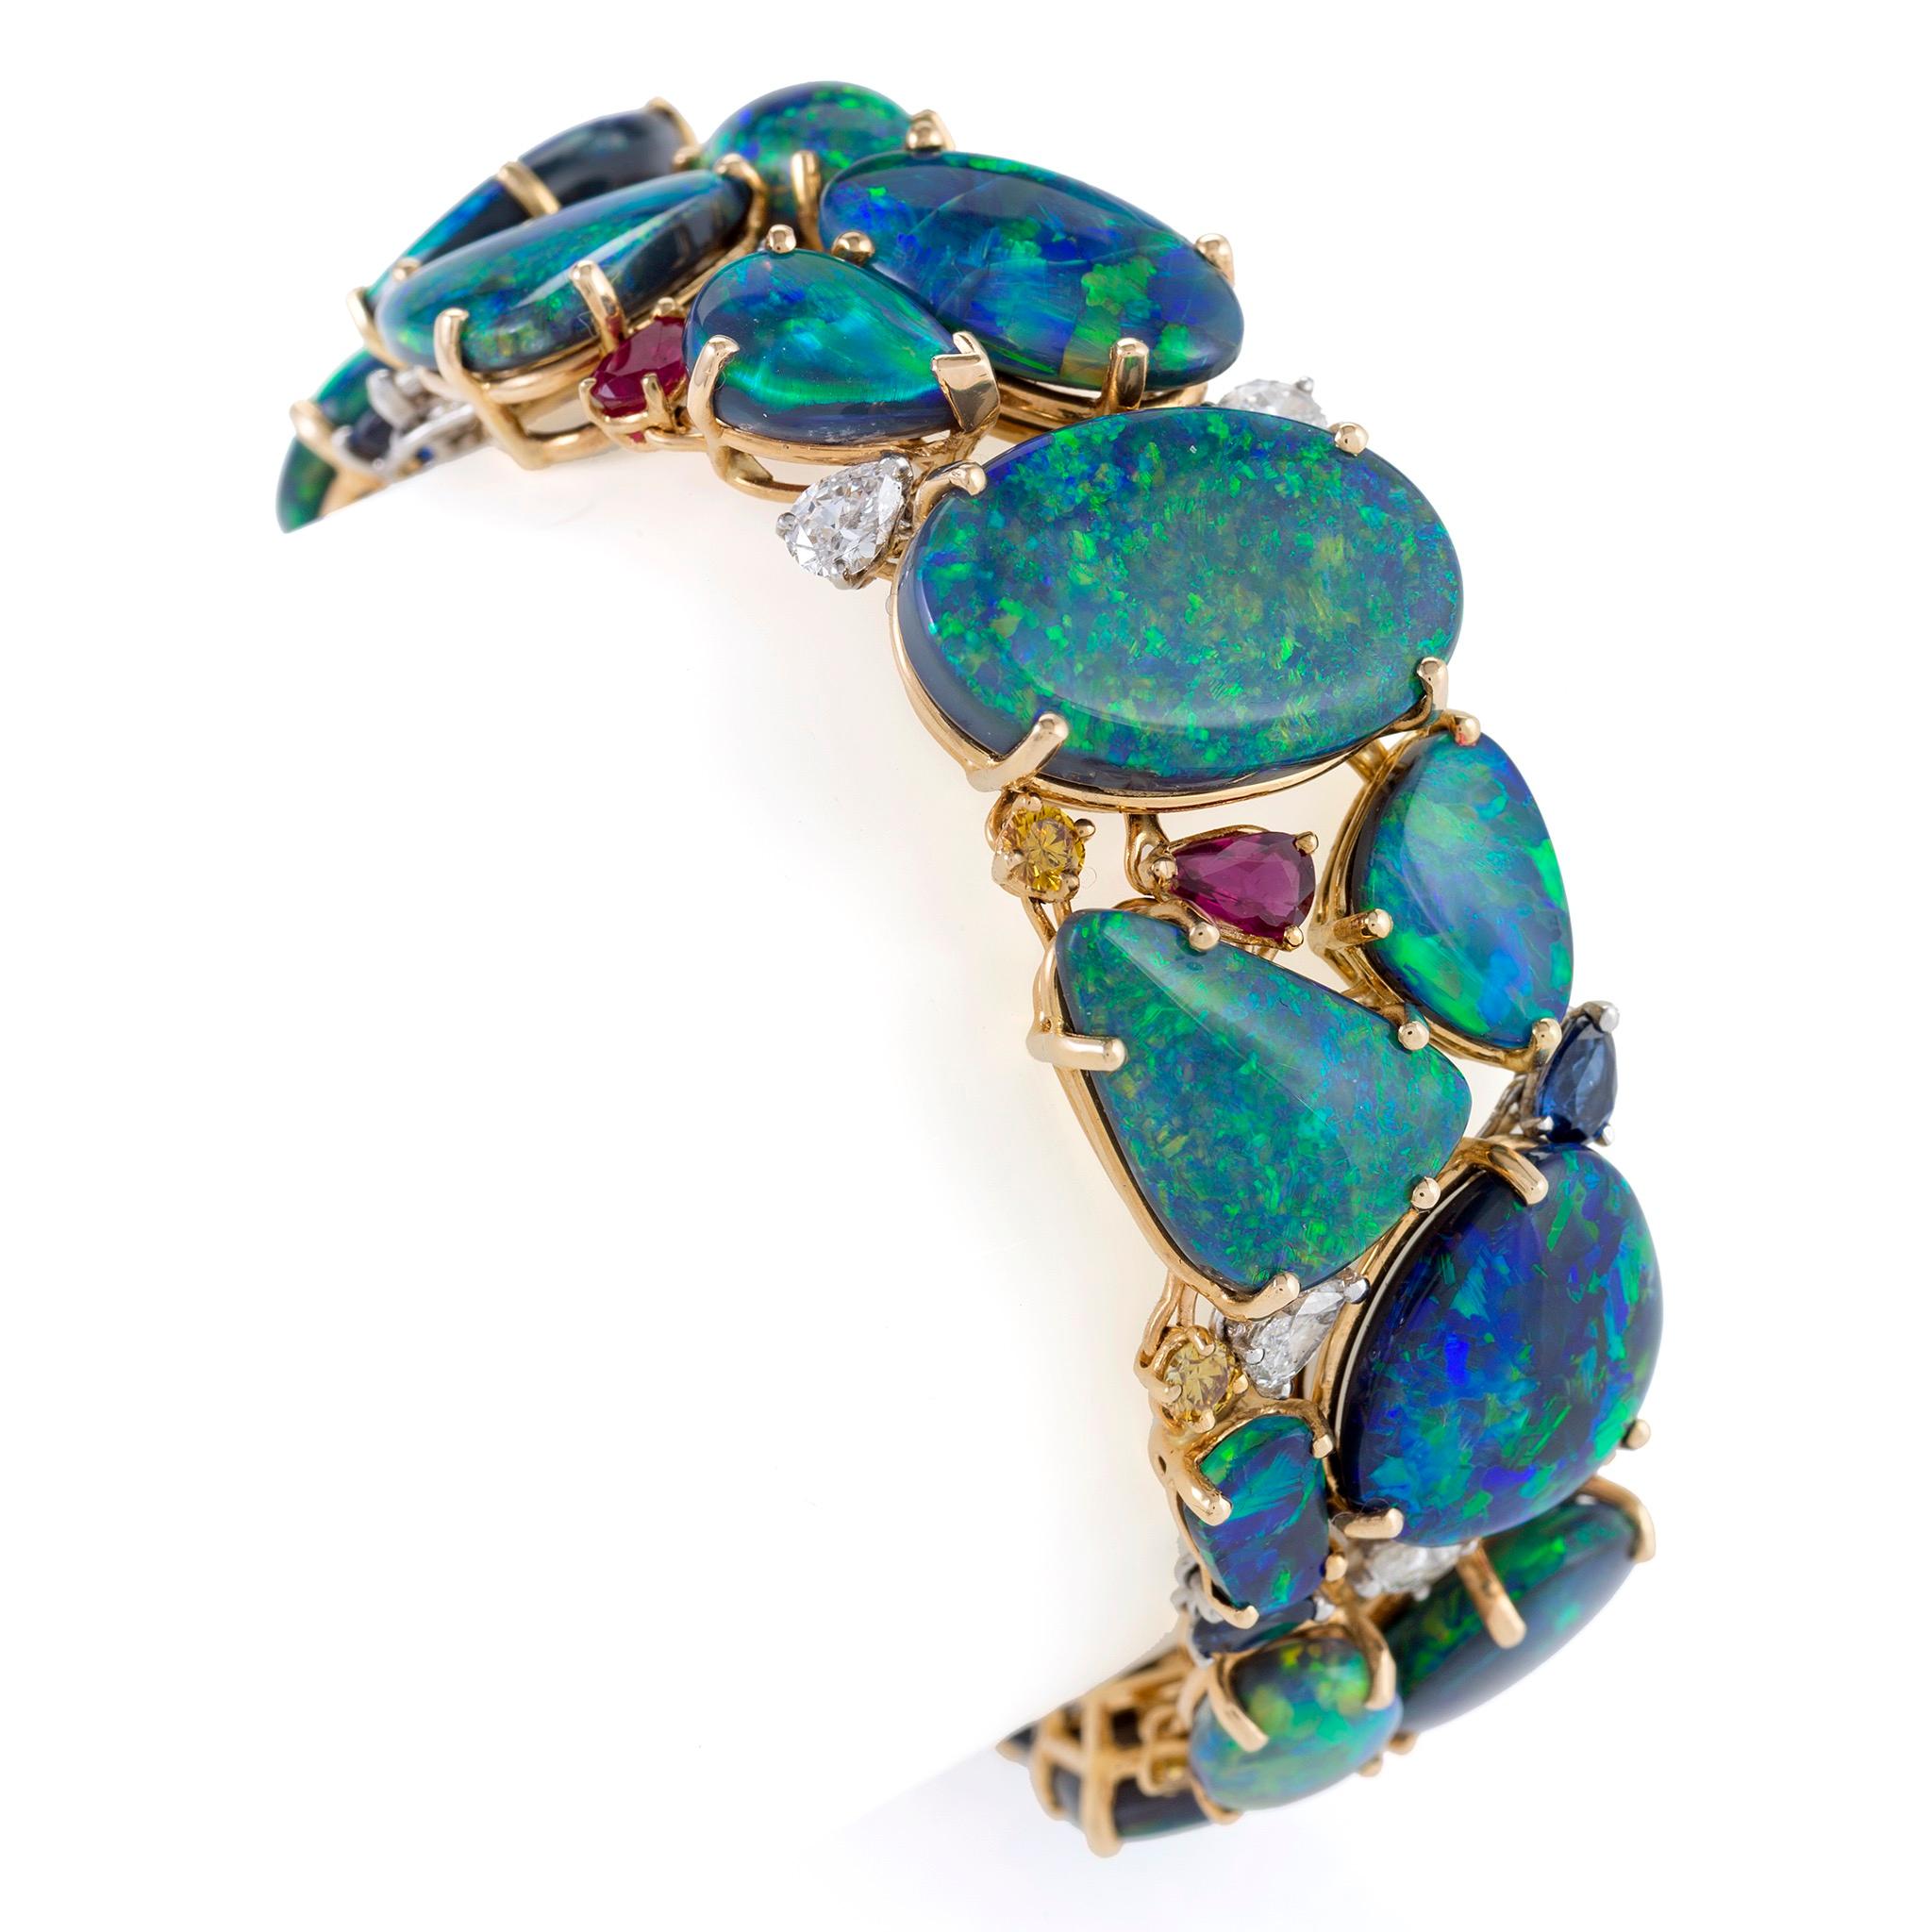 This contemporary bracelet created by Oscar Heyman & Brothers is composed of approximately eighty carats of variously shaped black opals, further enhanced by rubies, sapphires, yellow diamonds and diamonds, all set in gold and platinum. Centering a